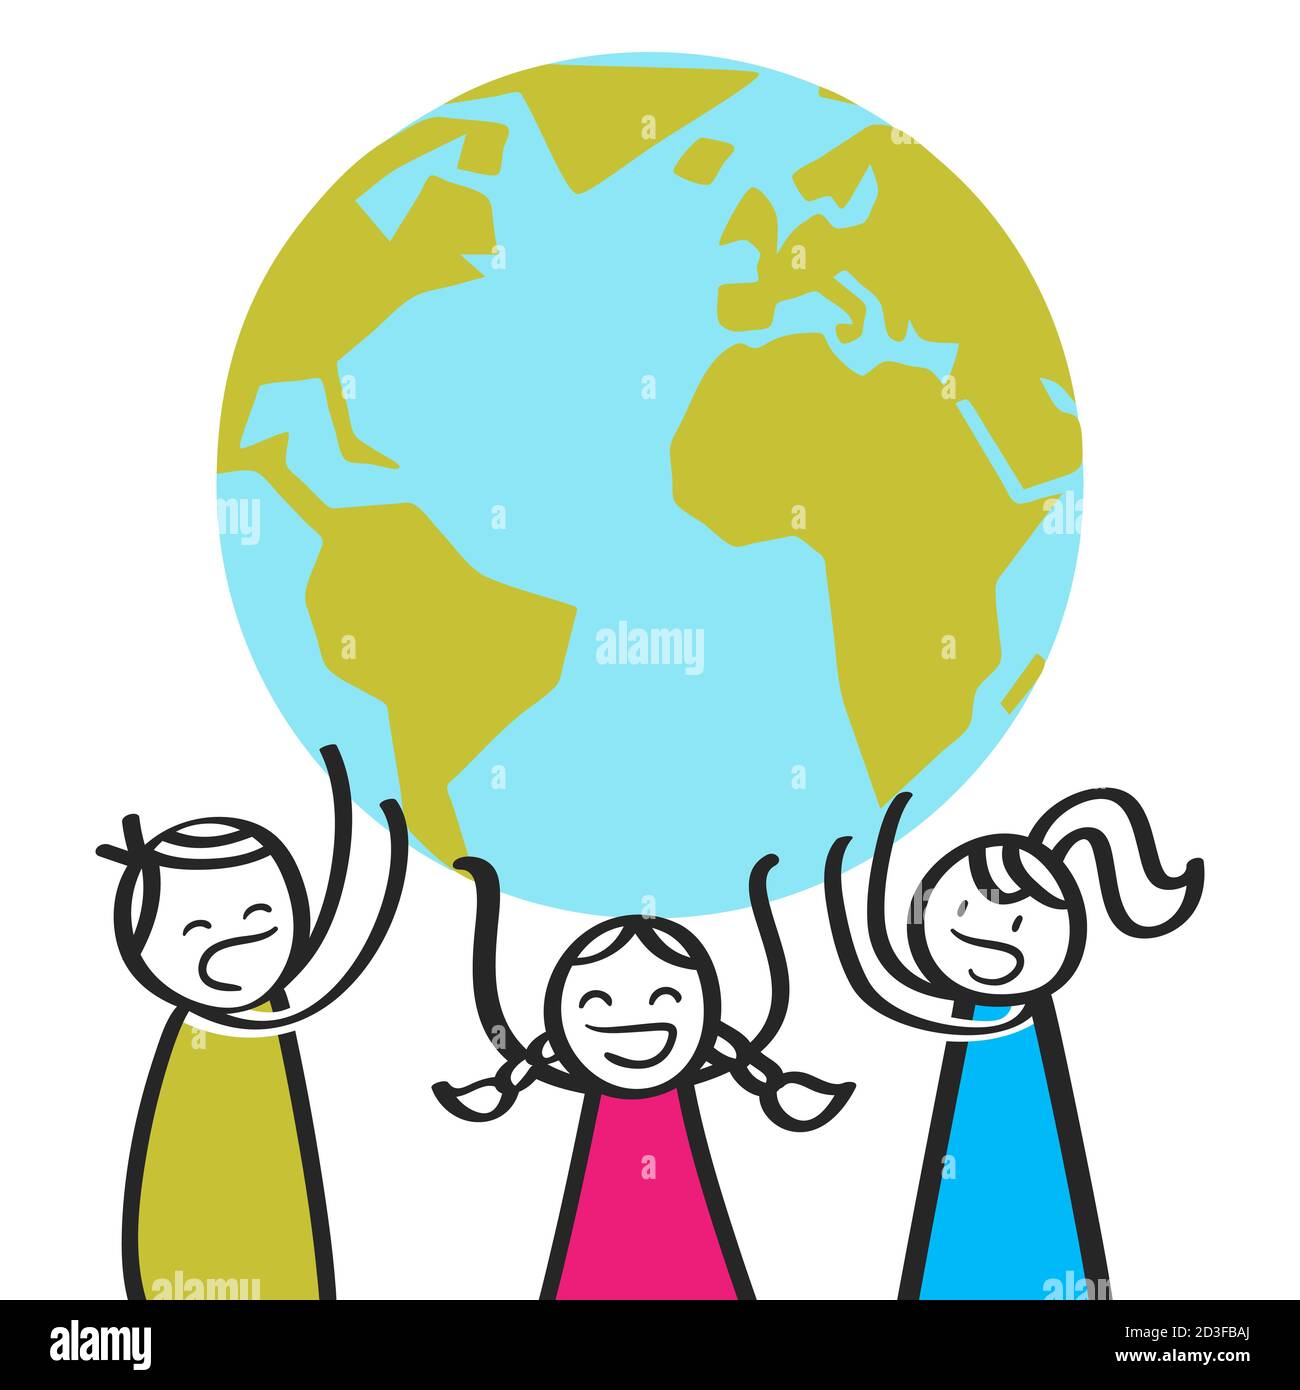 Cartoon stick figure children screaming while holding up giant globe Stock Vector